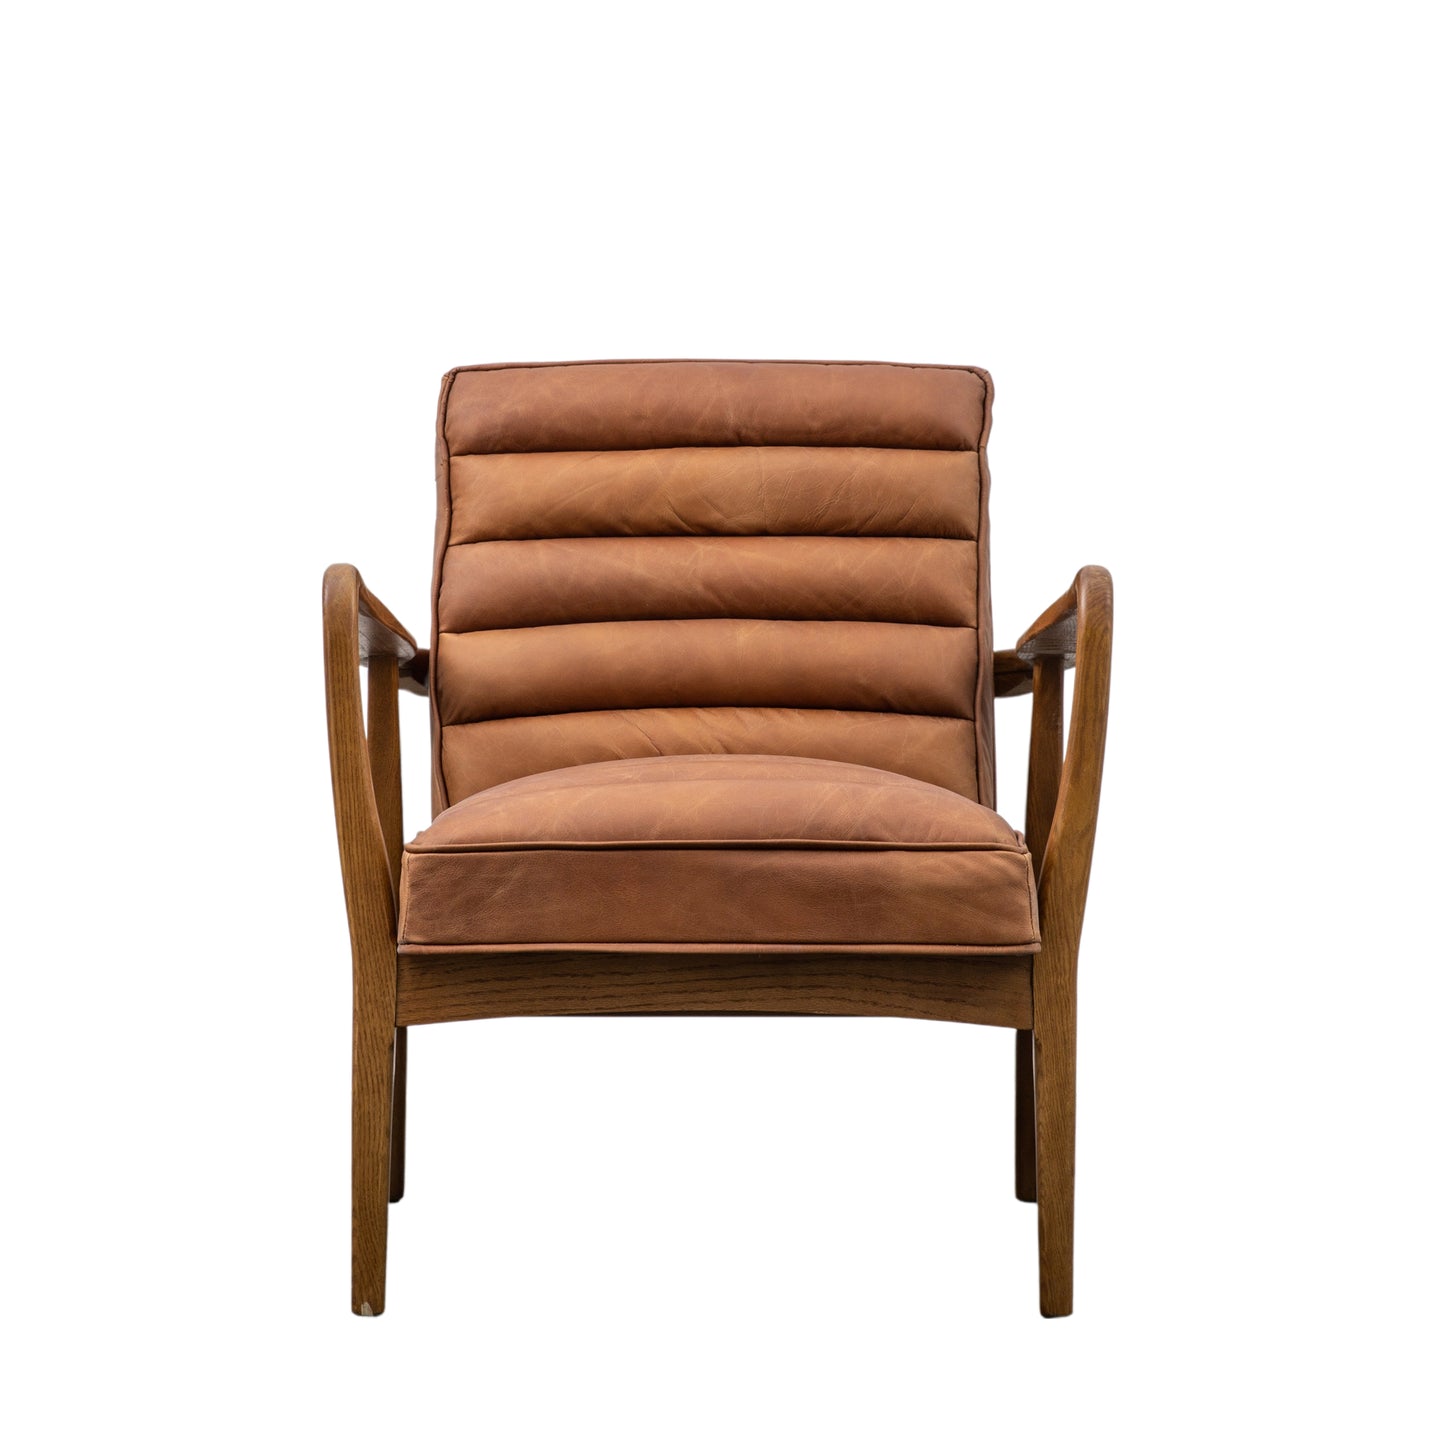 A Vintage Brown Leather lounge chair with wooden legs for home furniture and interior decor.